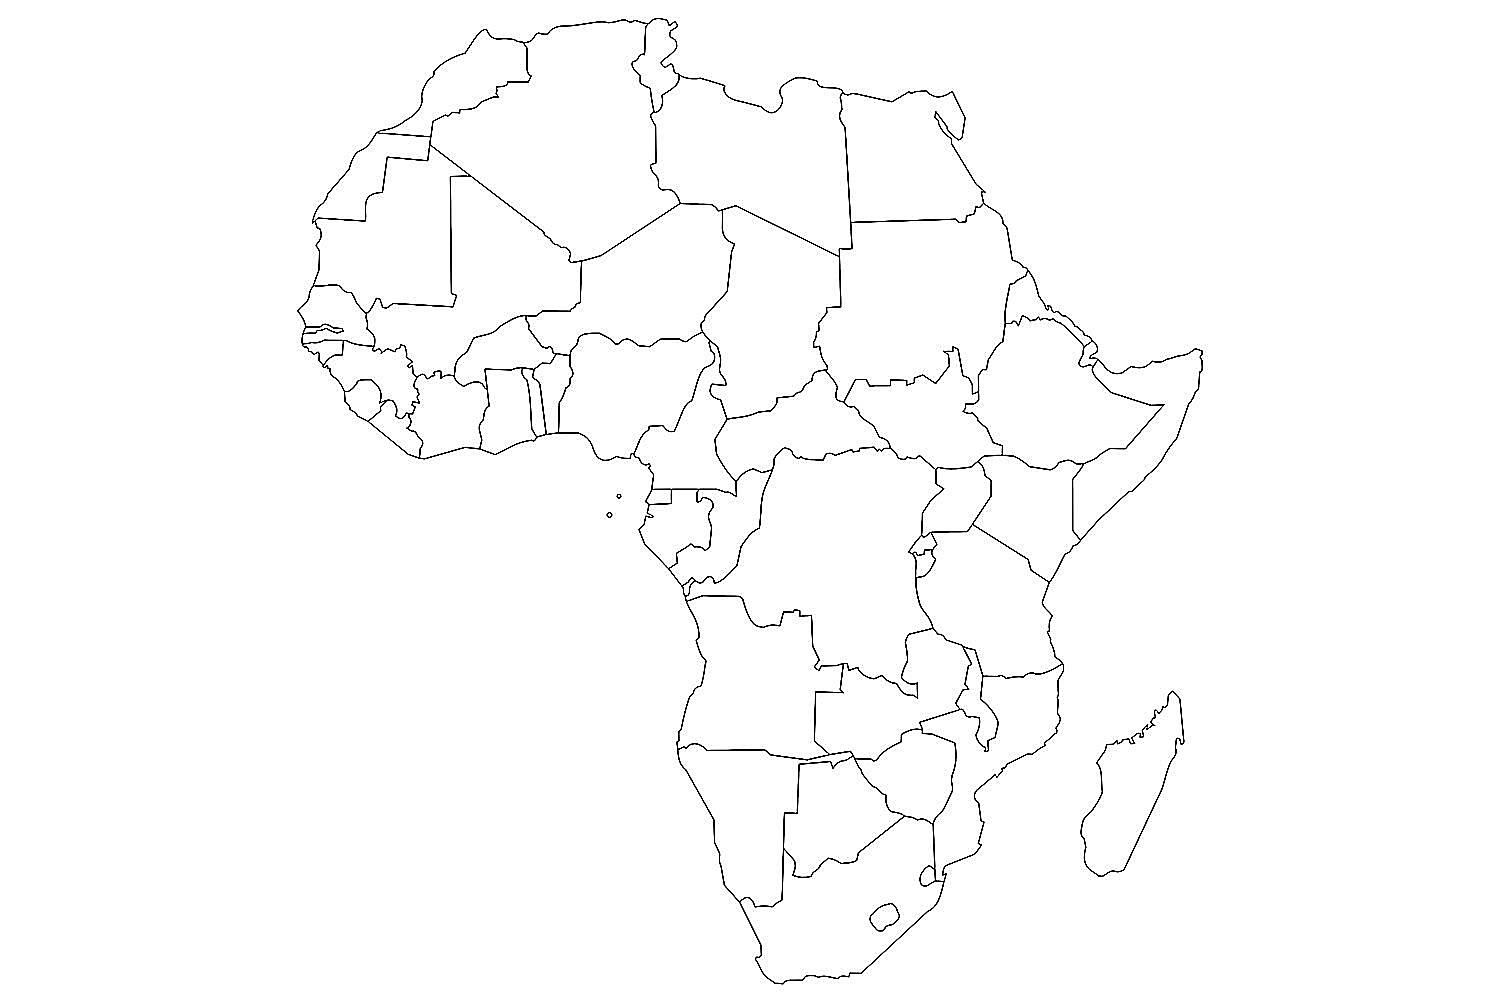 Draw The Political Map Of Africa